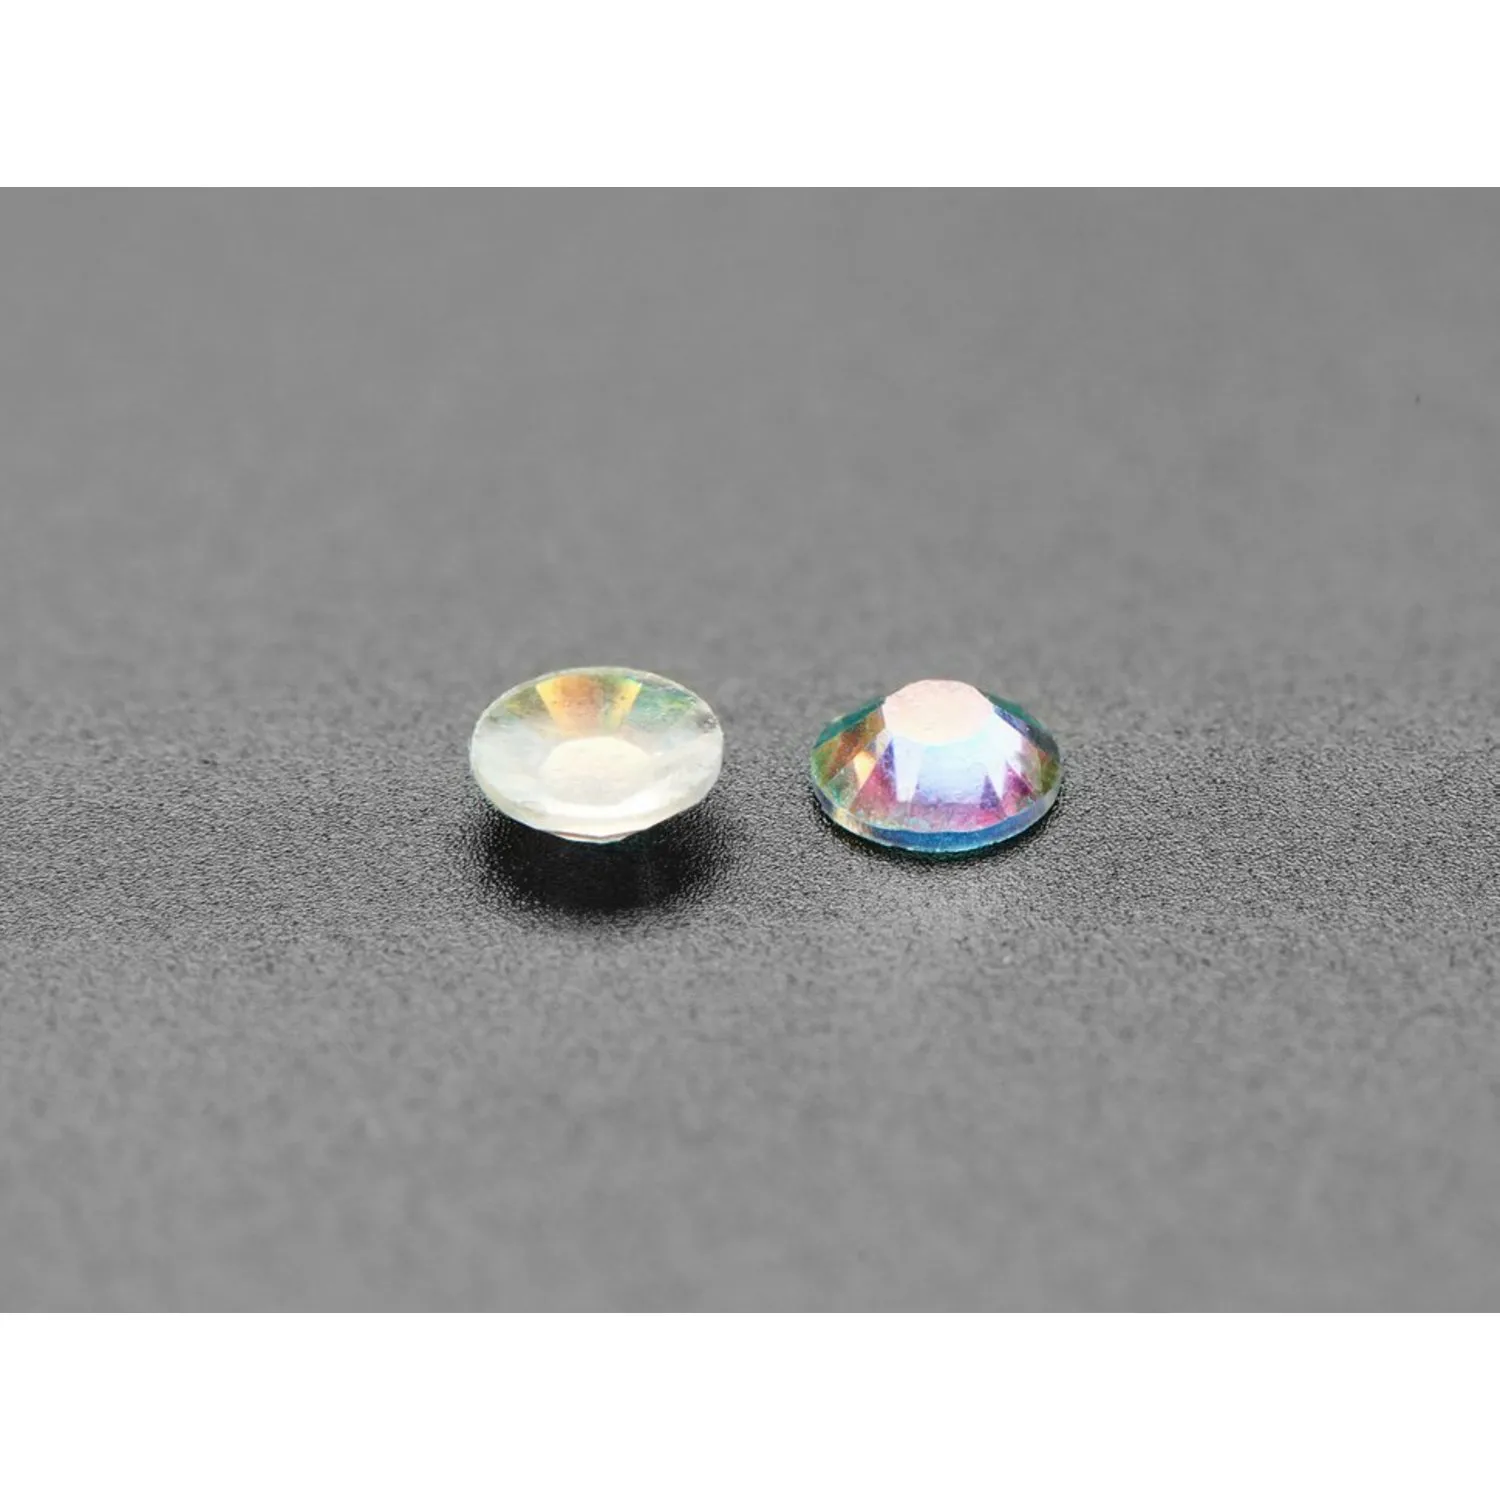 Photo of No-Foil Flat Back Rainbow Crystals for NeoPixel LEDs - 100 pack - SS16